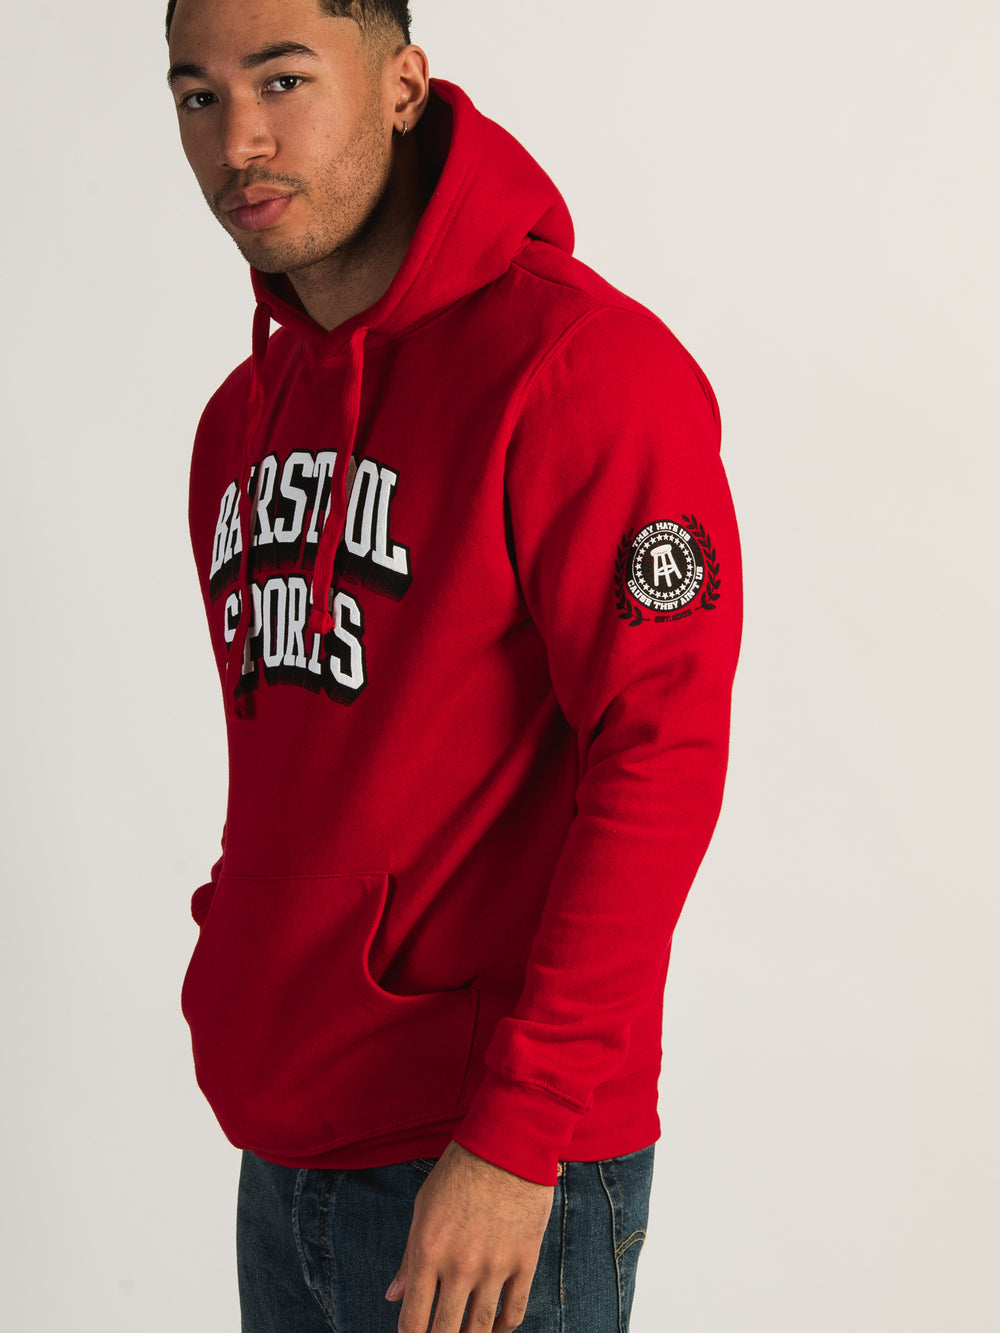 BARSTOOL SPORTS CORE PULL OVER HOODIE